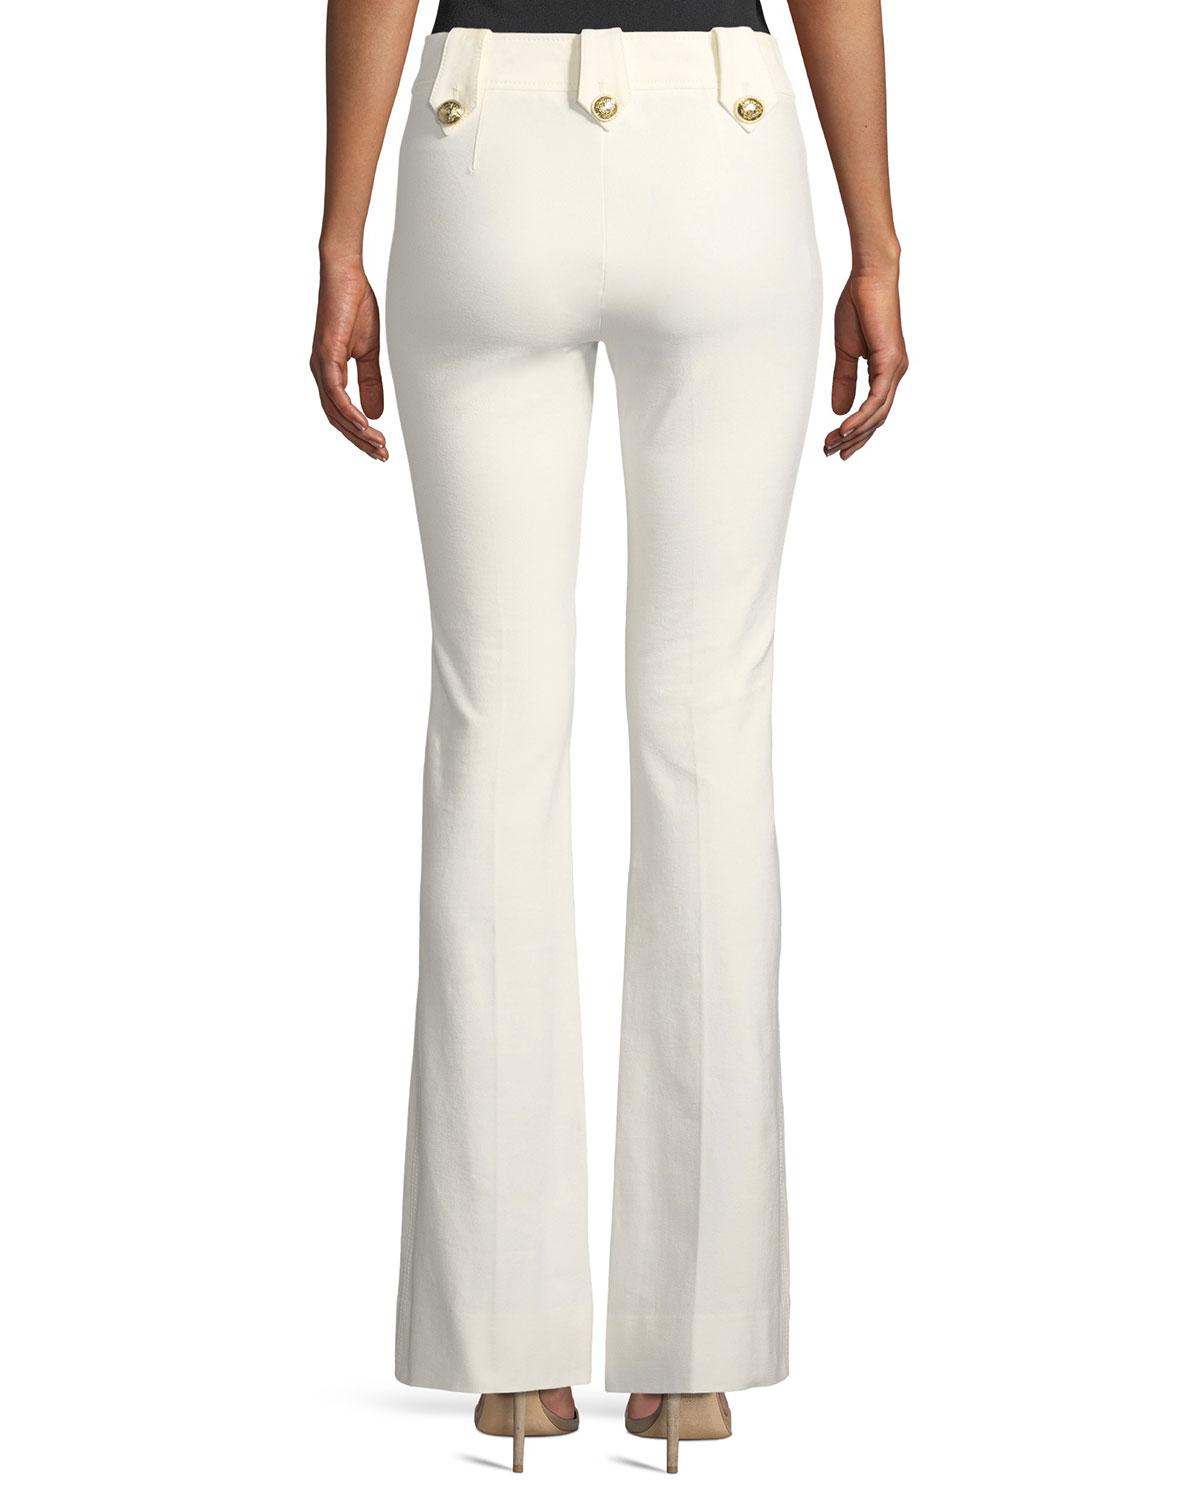 10 Crosby Derek Lam Flare Trousers W/ Sailor Buttons in White - Lyst